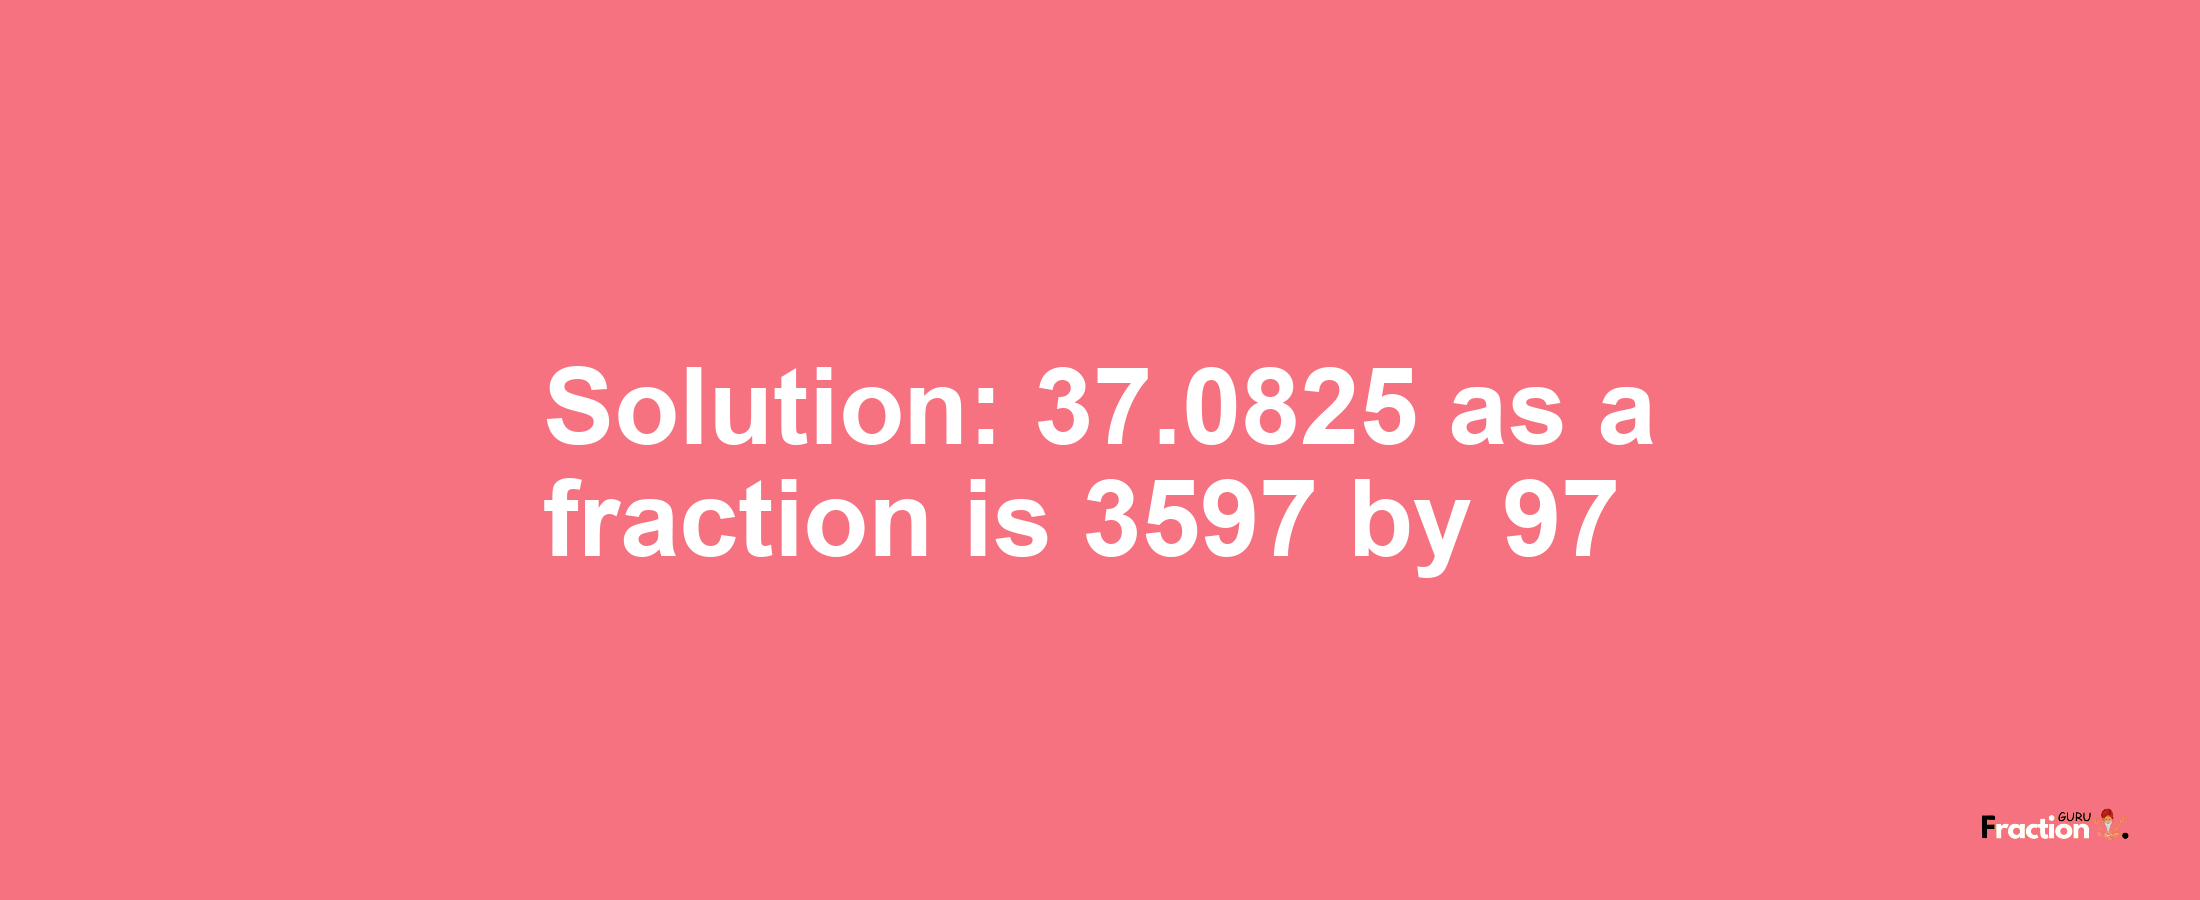 Solution:37.0825 as a fraction is 3597/97